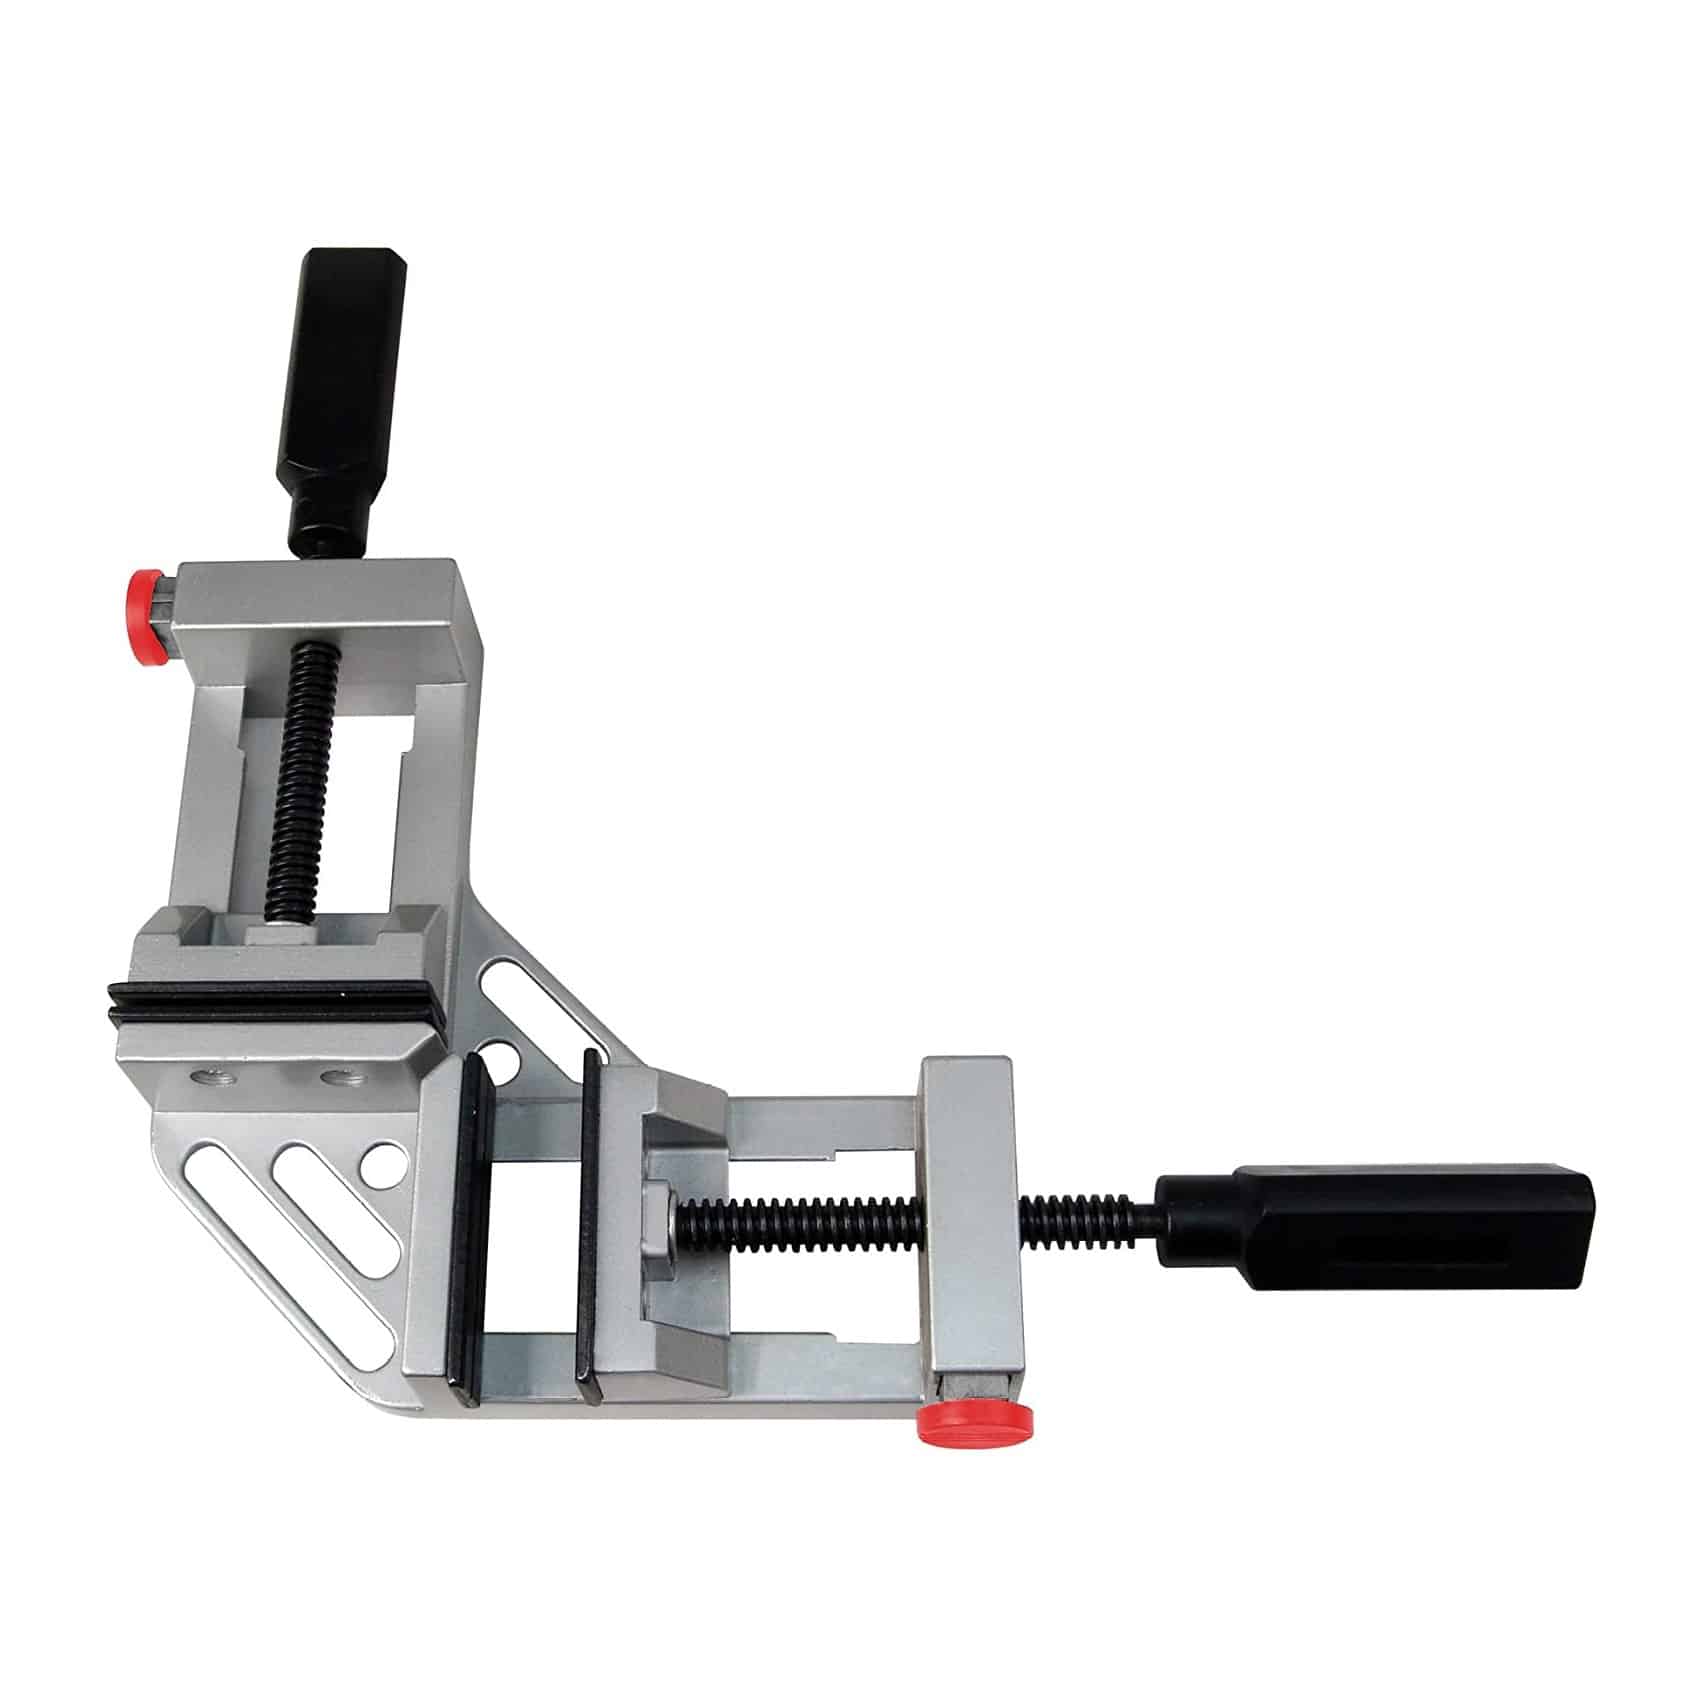 Wolfcraft 3415405 Quick jaw Right Angle Corner Clamp - 10 Best Corner Clamps - A Complete Guide - HandyMan.Guide - Corner Clamps